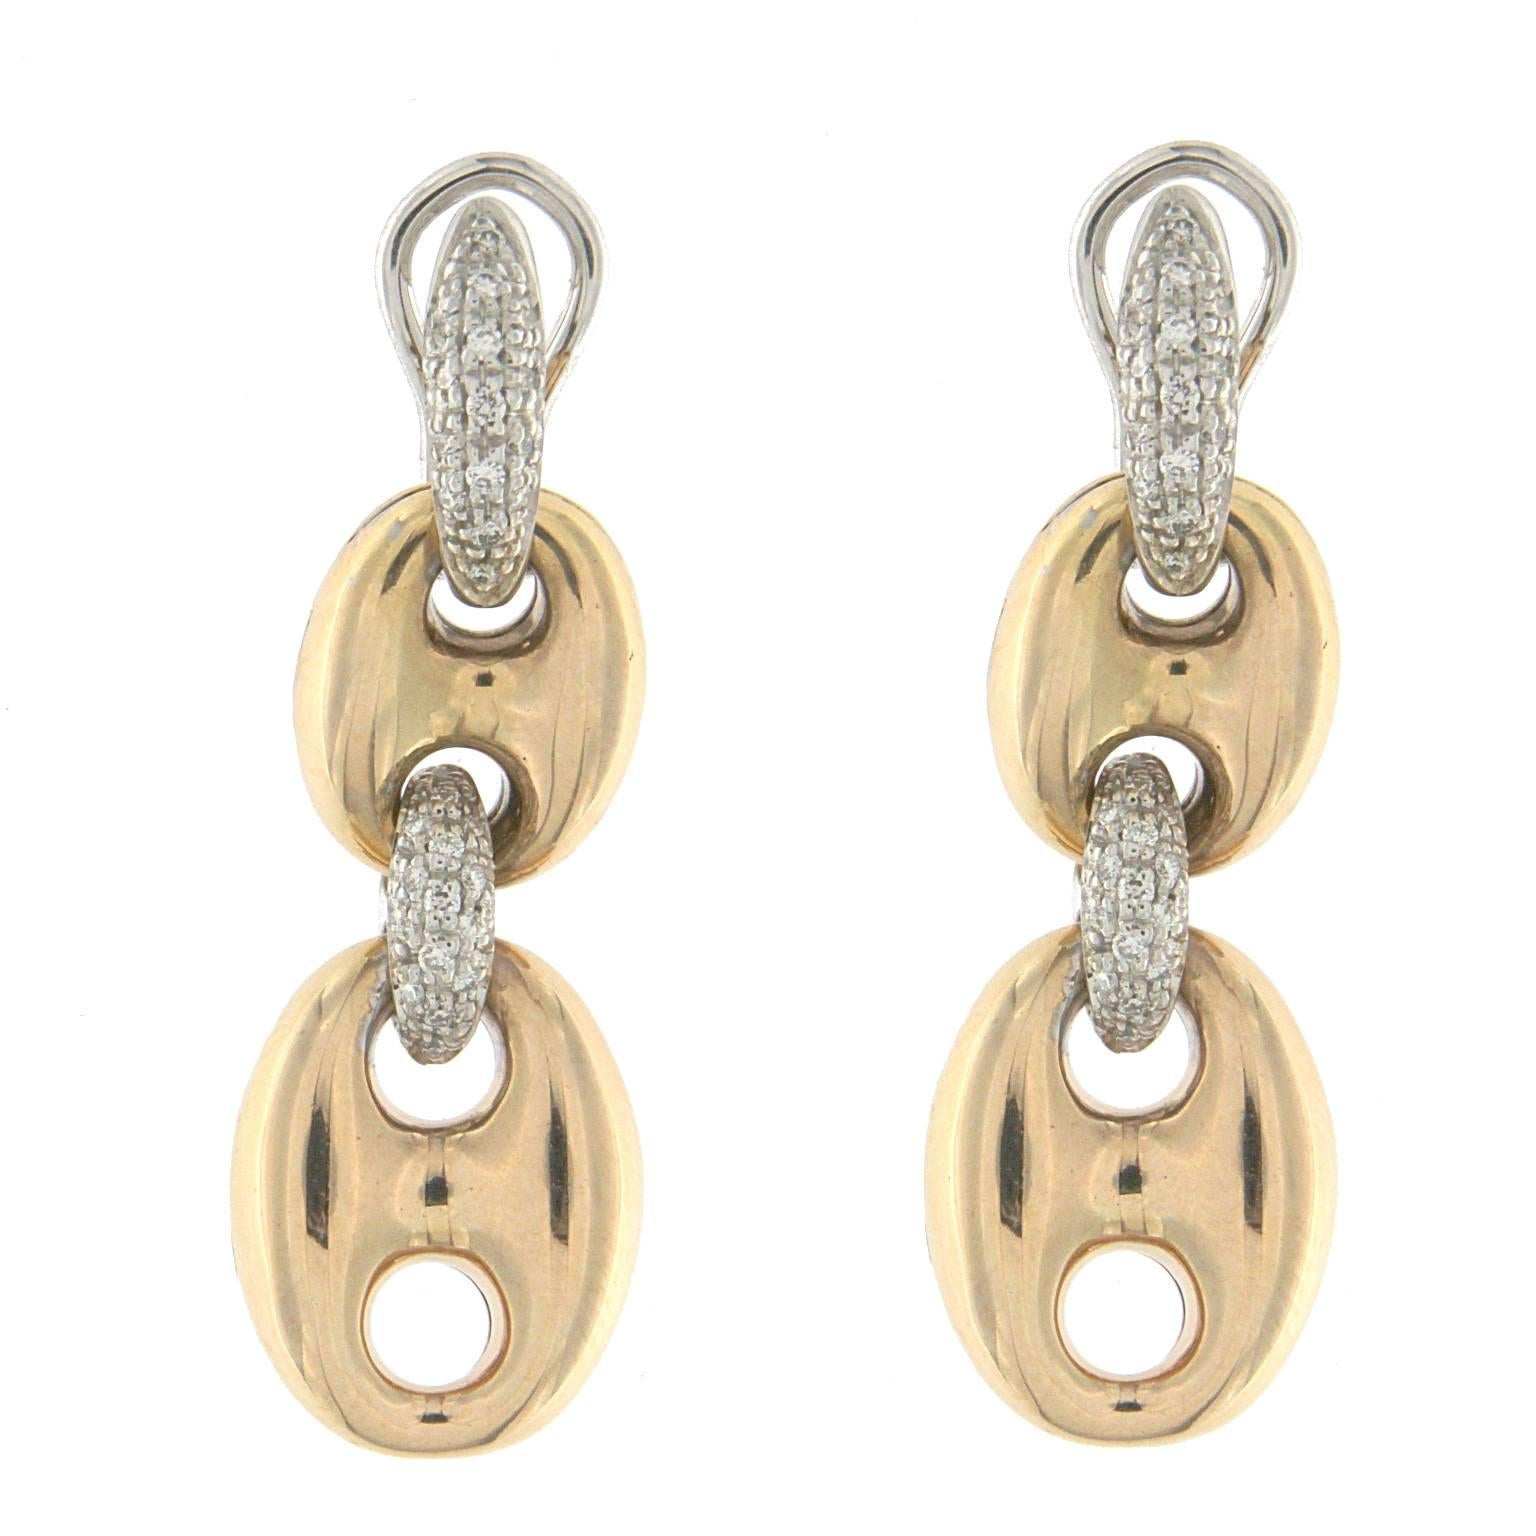 Earrings from the Collection "Marina" 18 Karat Rose and White Gold and Diamonds